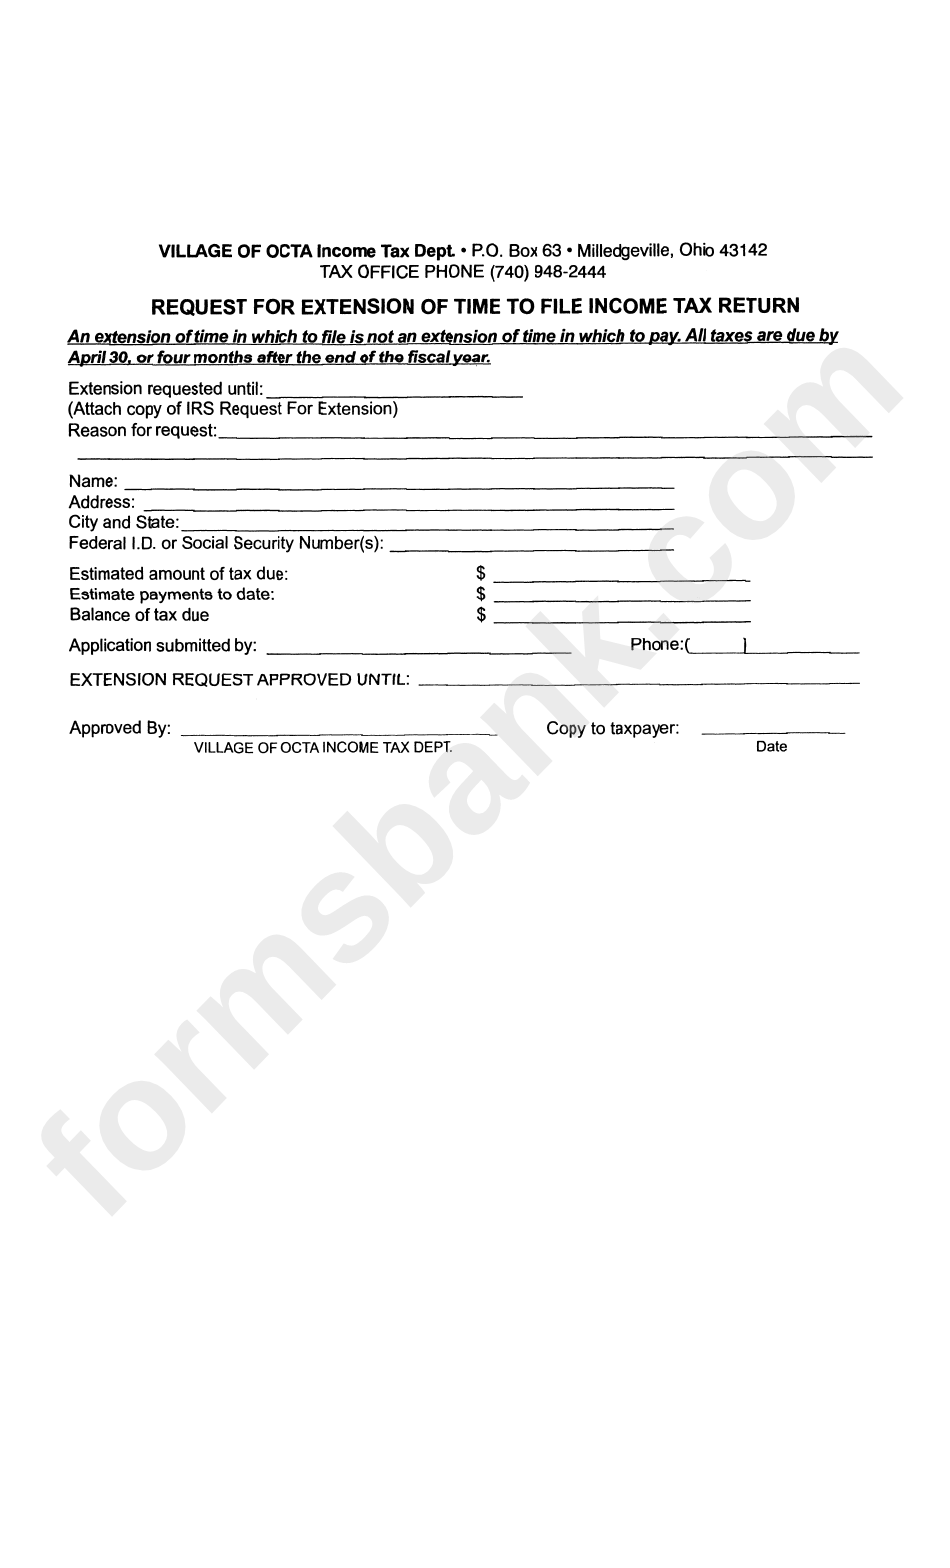 Request For Extension Of Time To File Income Tax Return Form - State Of Ohio